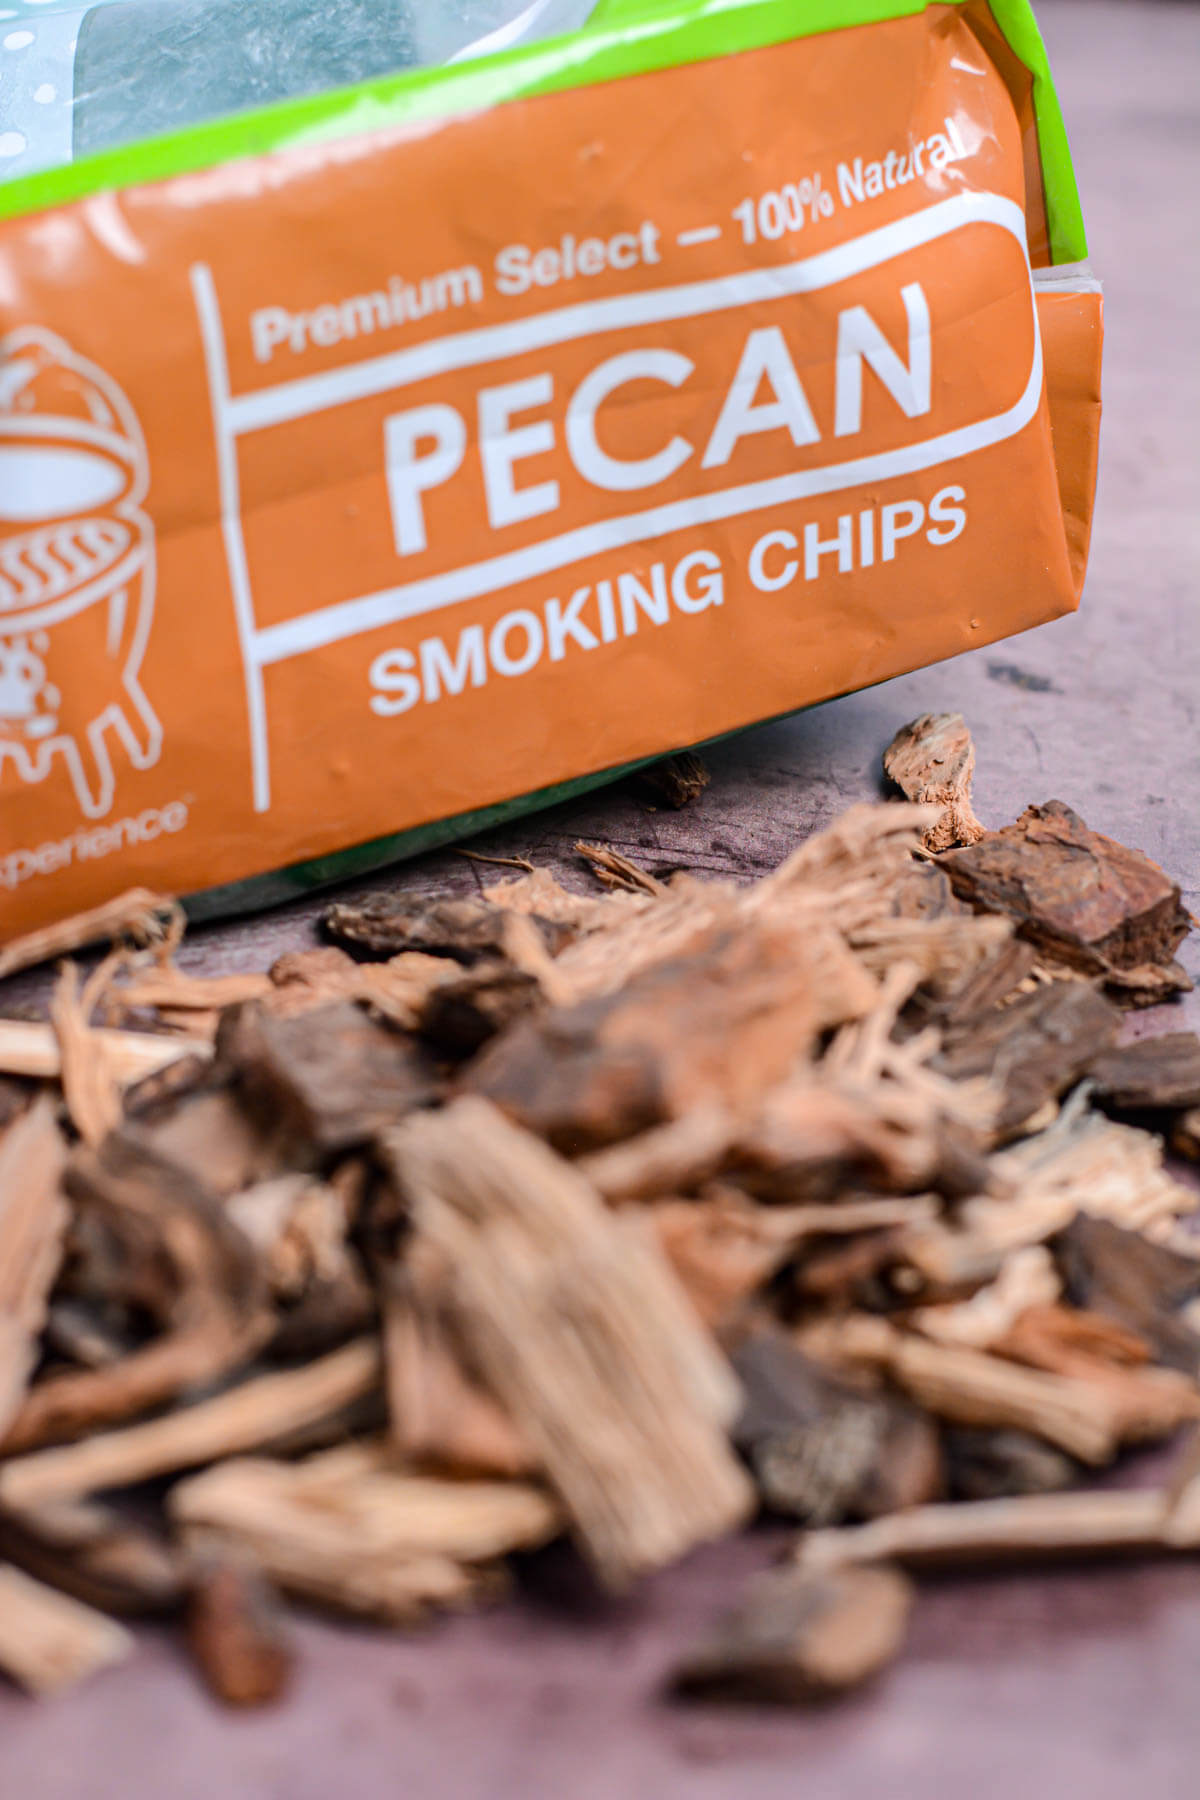 bag of pecan wood chips and a stack of them in front.